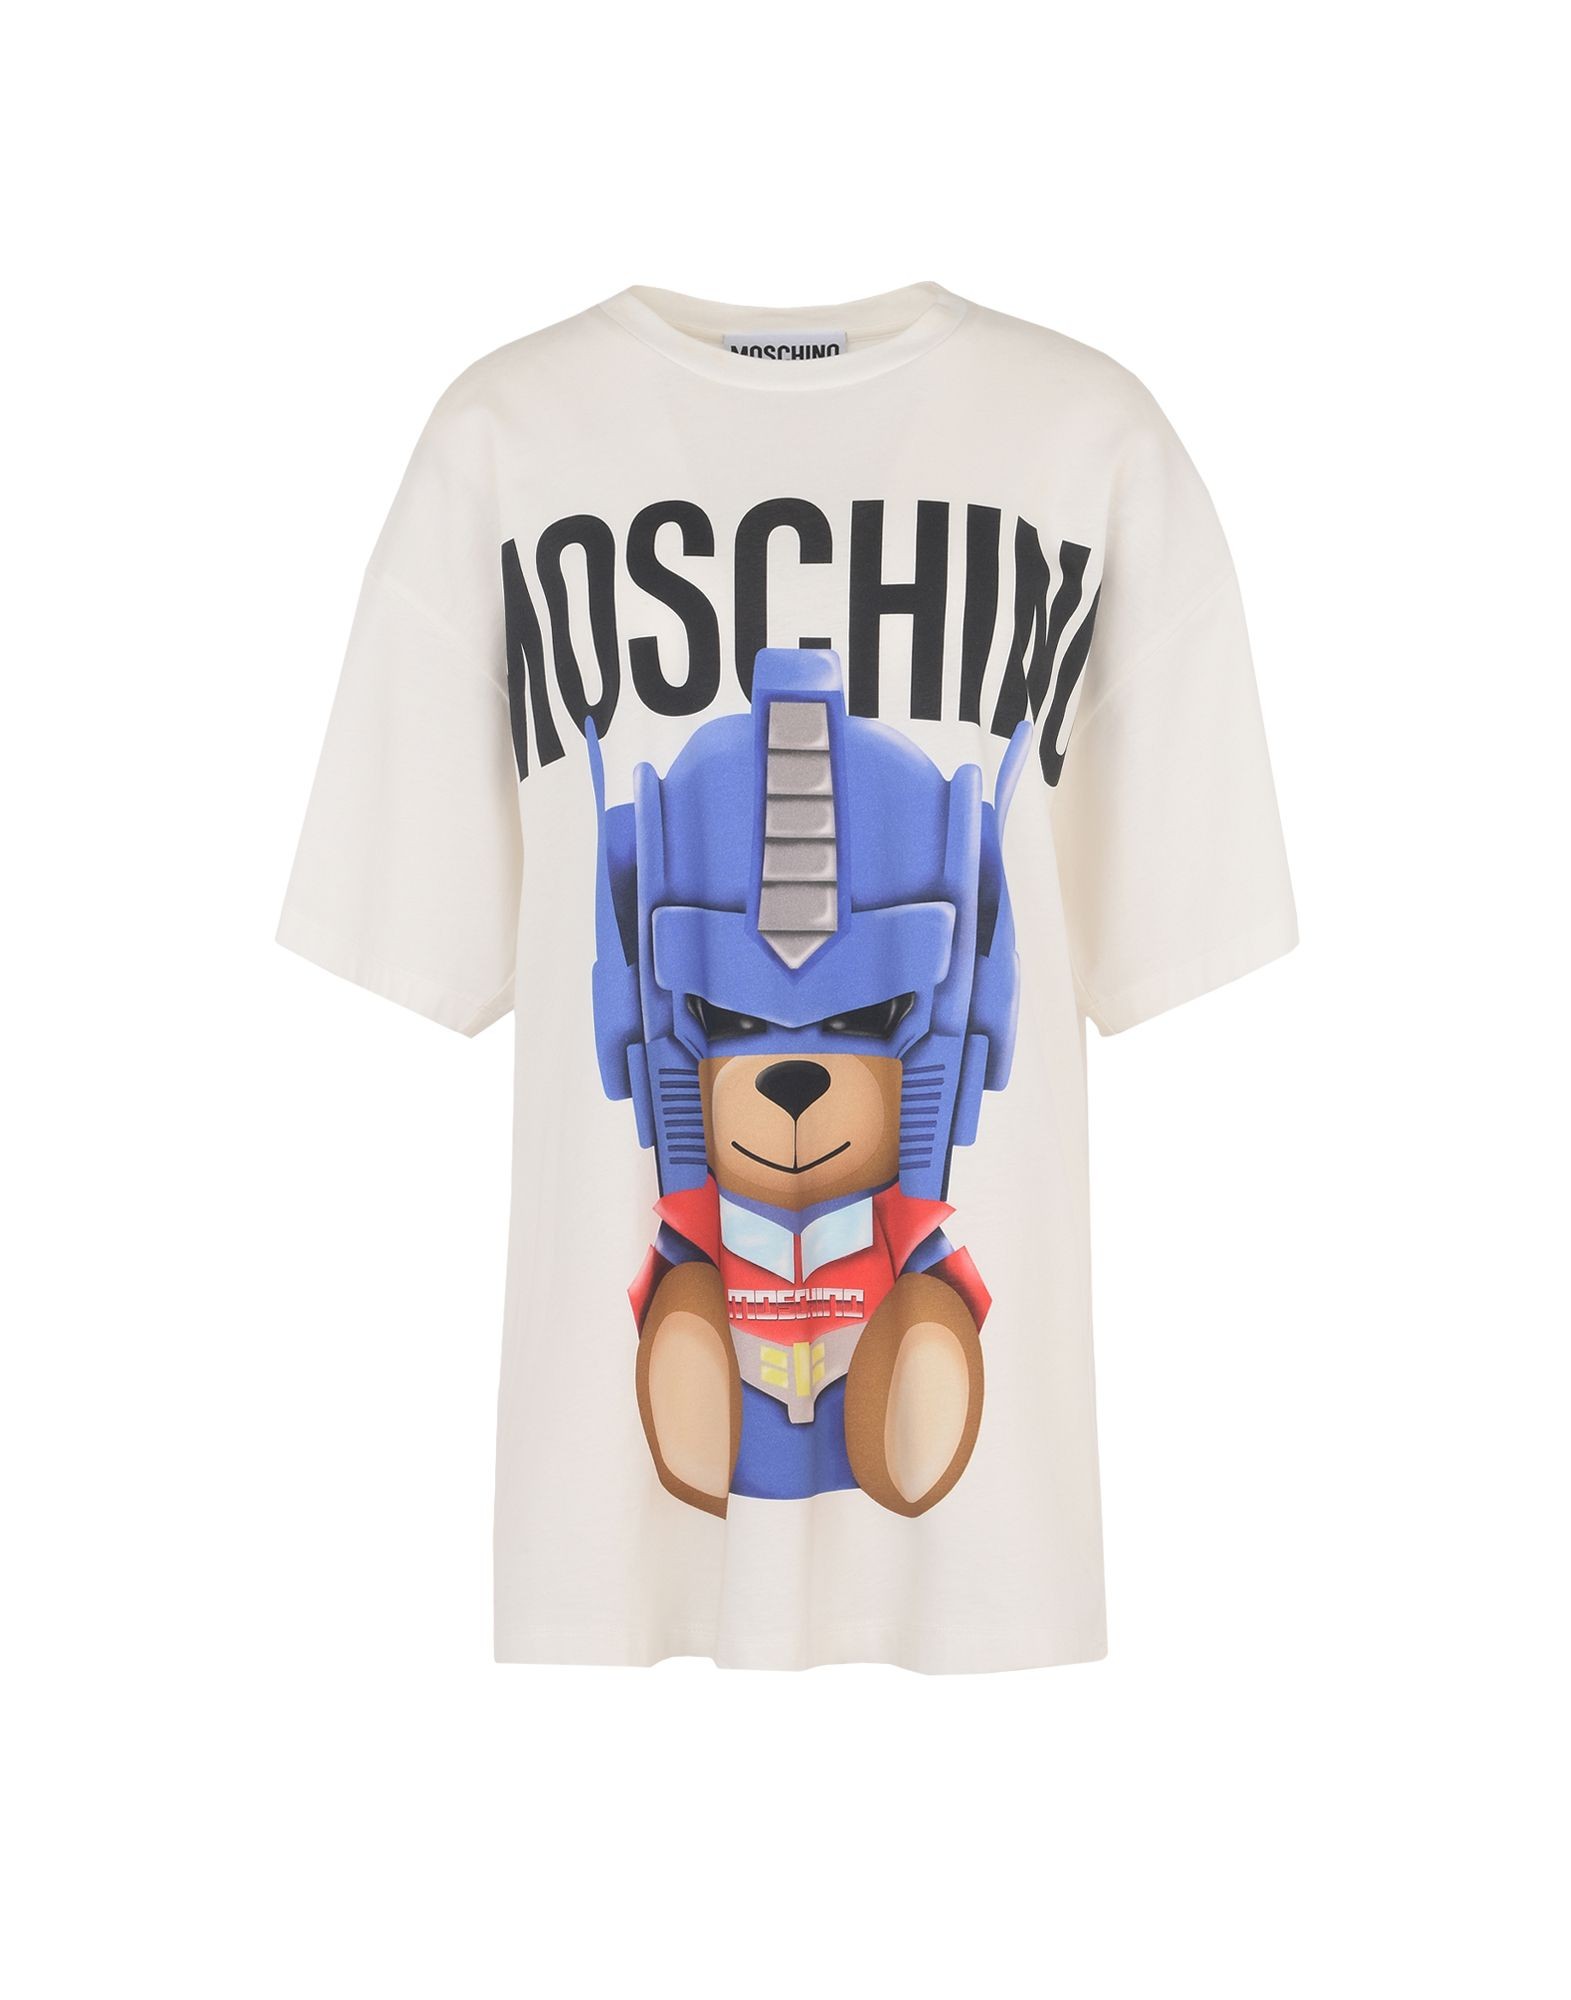 Transformers News: Moschino Transformers Ready to Bear FW17 Collection